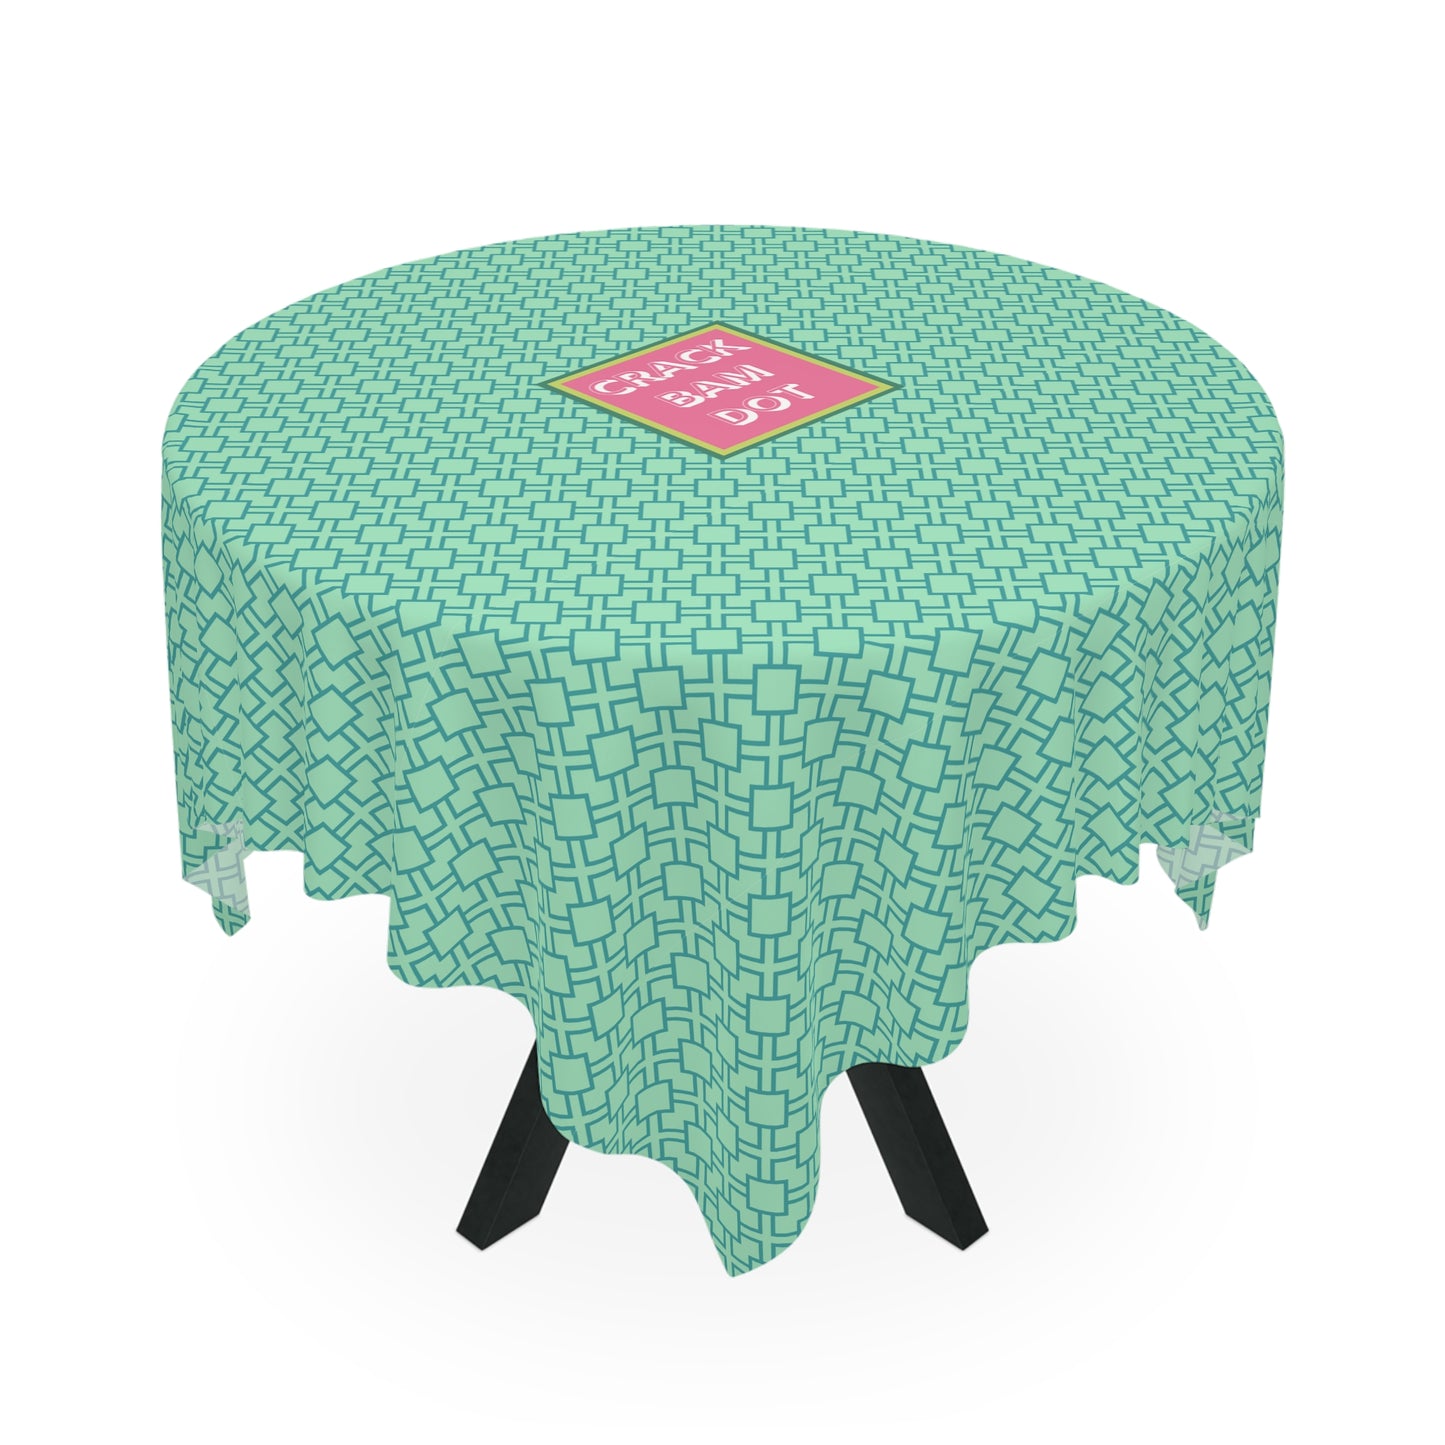 Personalized Mahjong Tablecloth for Game Table (55" x 55"). Upgrade your Mahjongg Mat with our Custom, Colorful, Unique Table Cover.